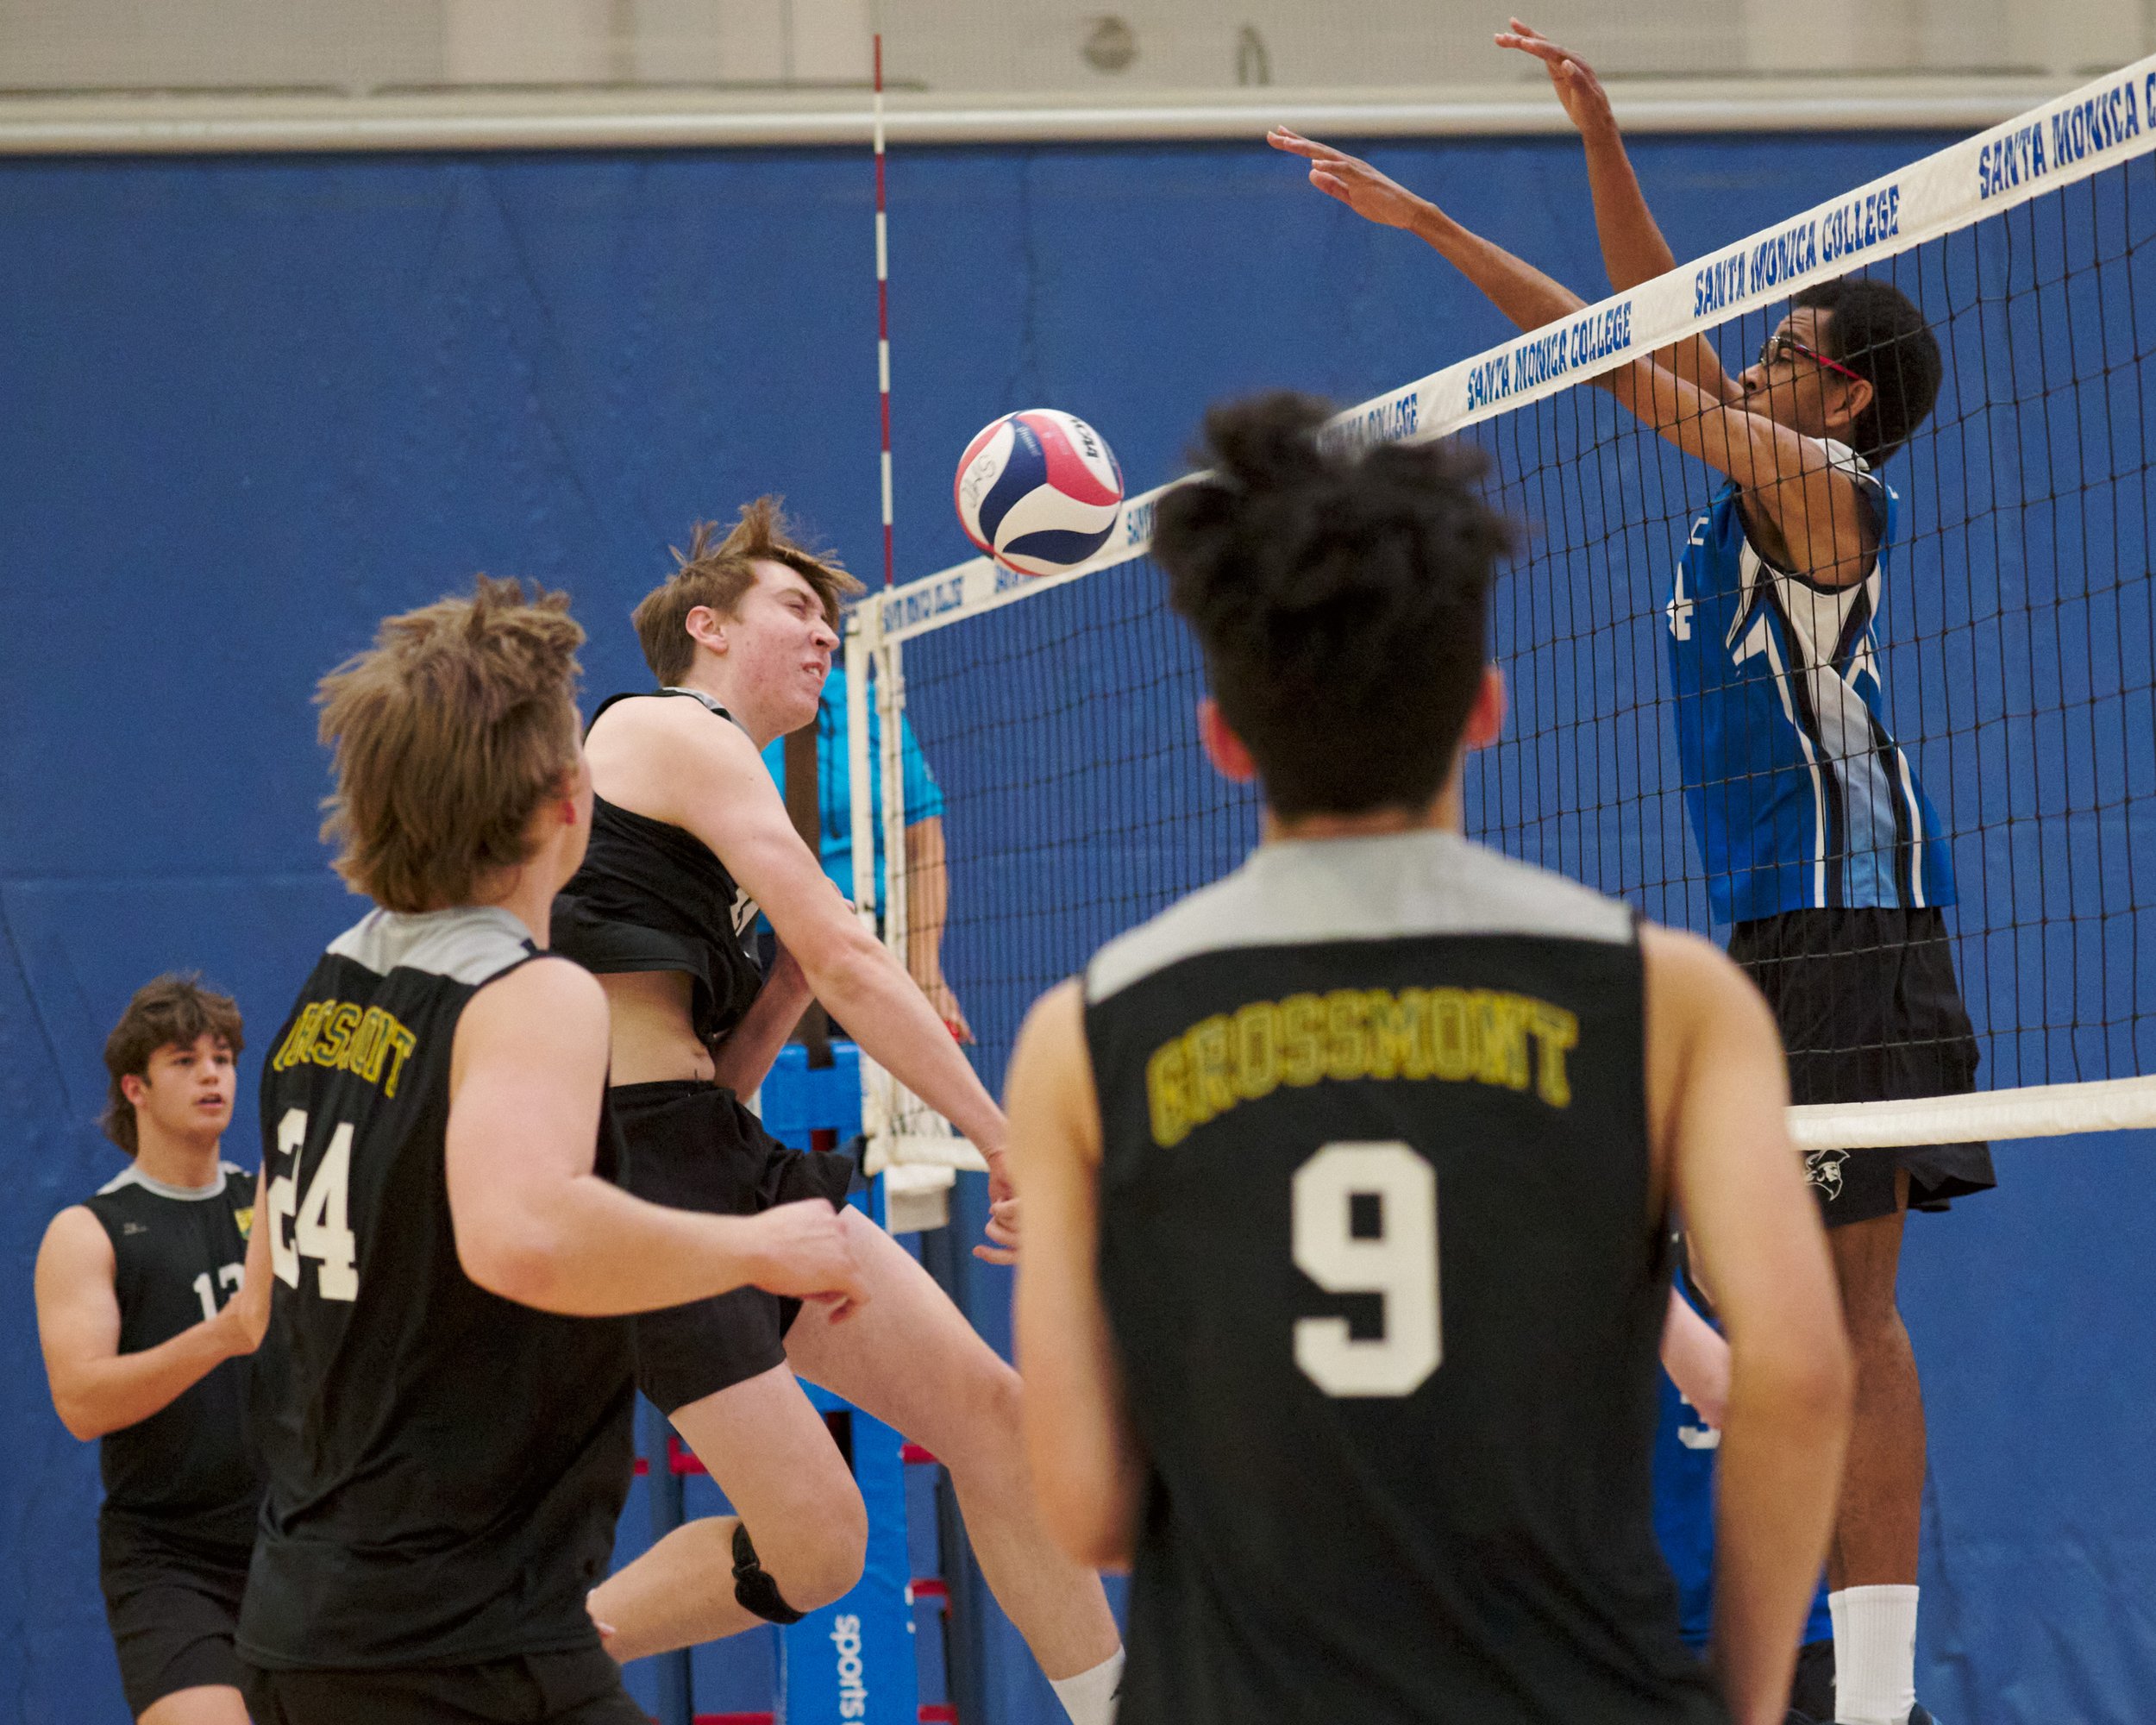  Santa Monica College Corsairs' Beikwaw Yankey (right) blocks the ball sent by Grossmont College Griffins' Tanner May (center) during the men's volleyball match on Wednesday, Feb. 15, 2023,  at Corsair Gym in Santa Monica, Calif. The Corsairs won 3-0